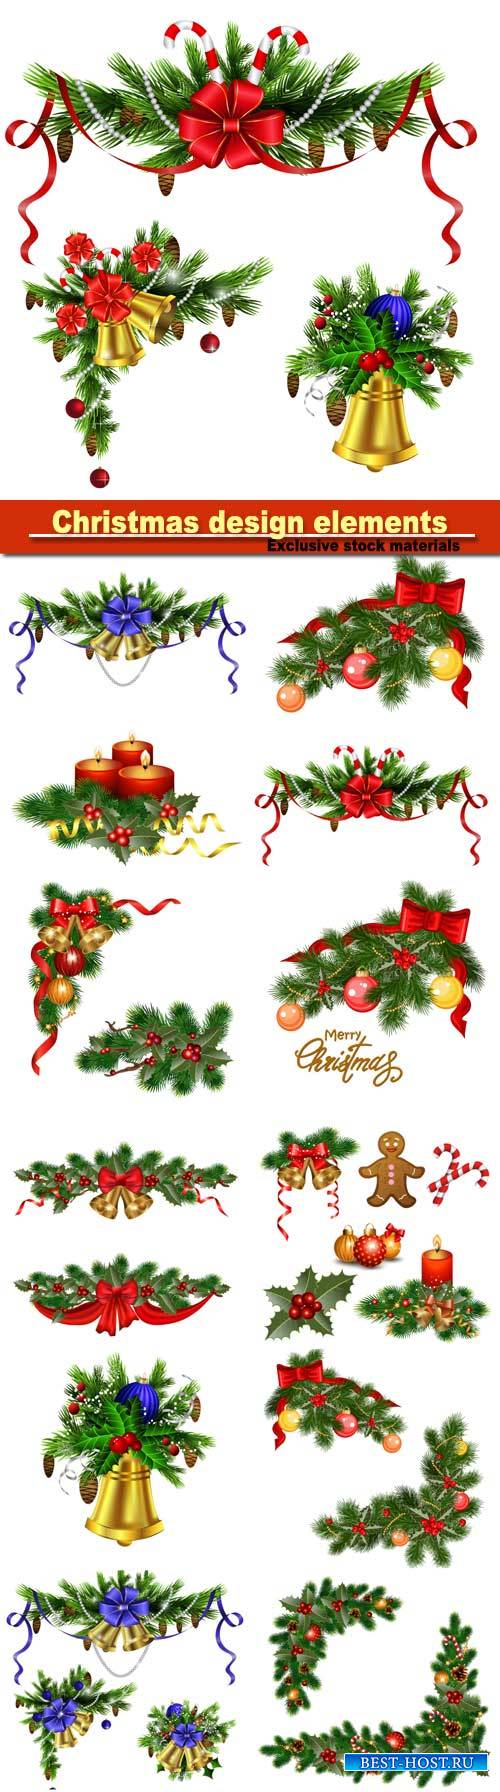 Christmas design elements, background with fir tree, holly and decorative e ...